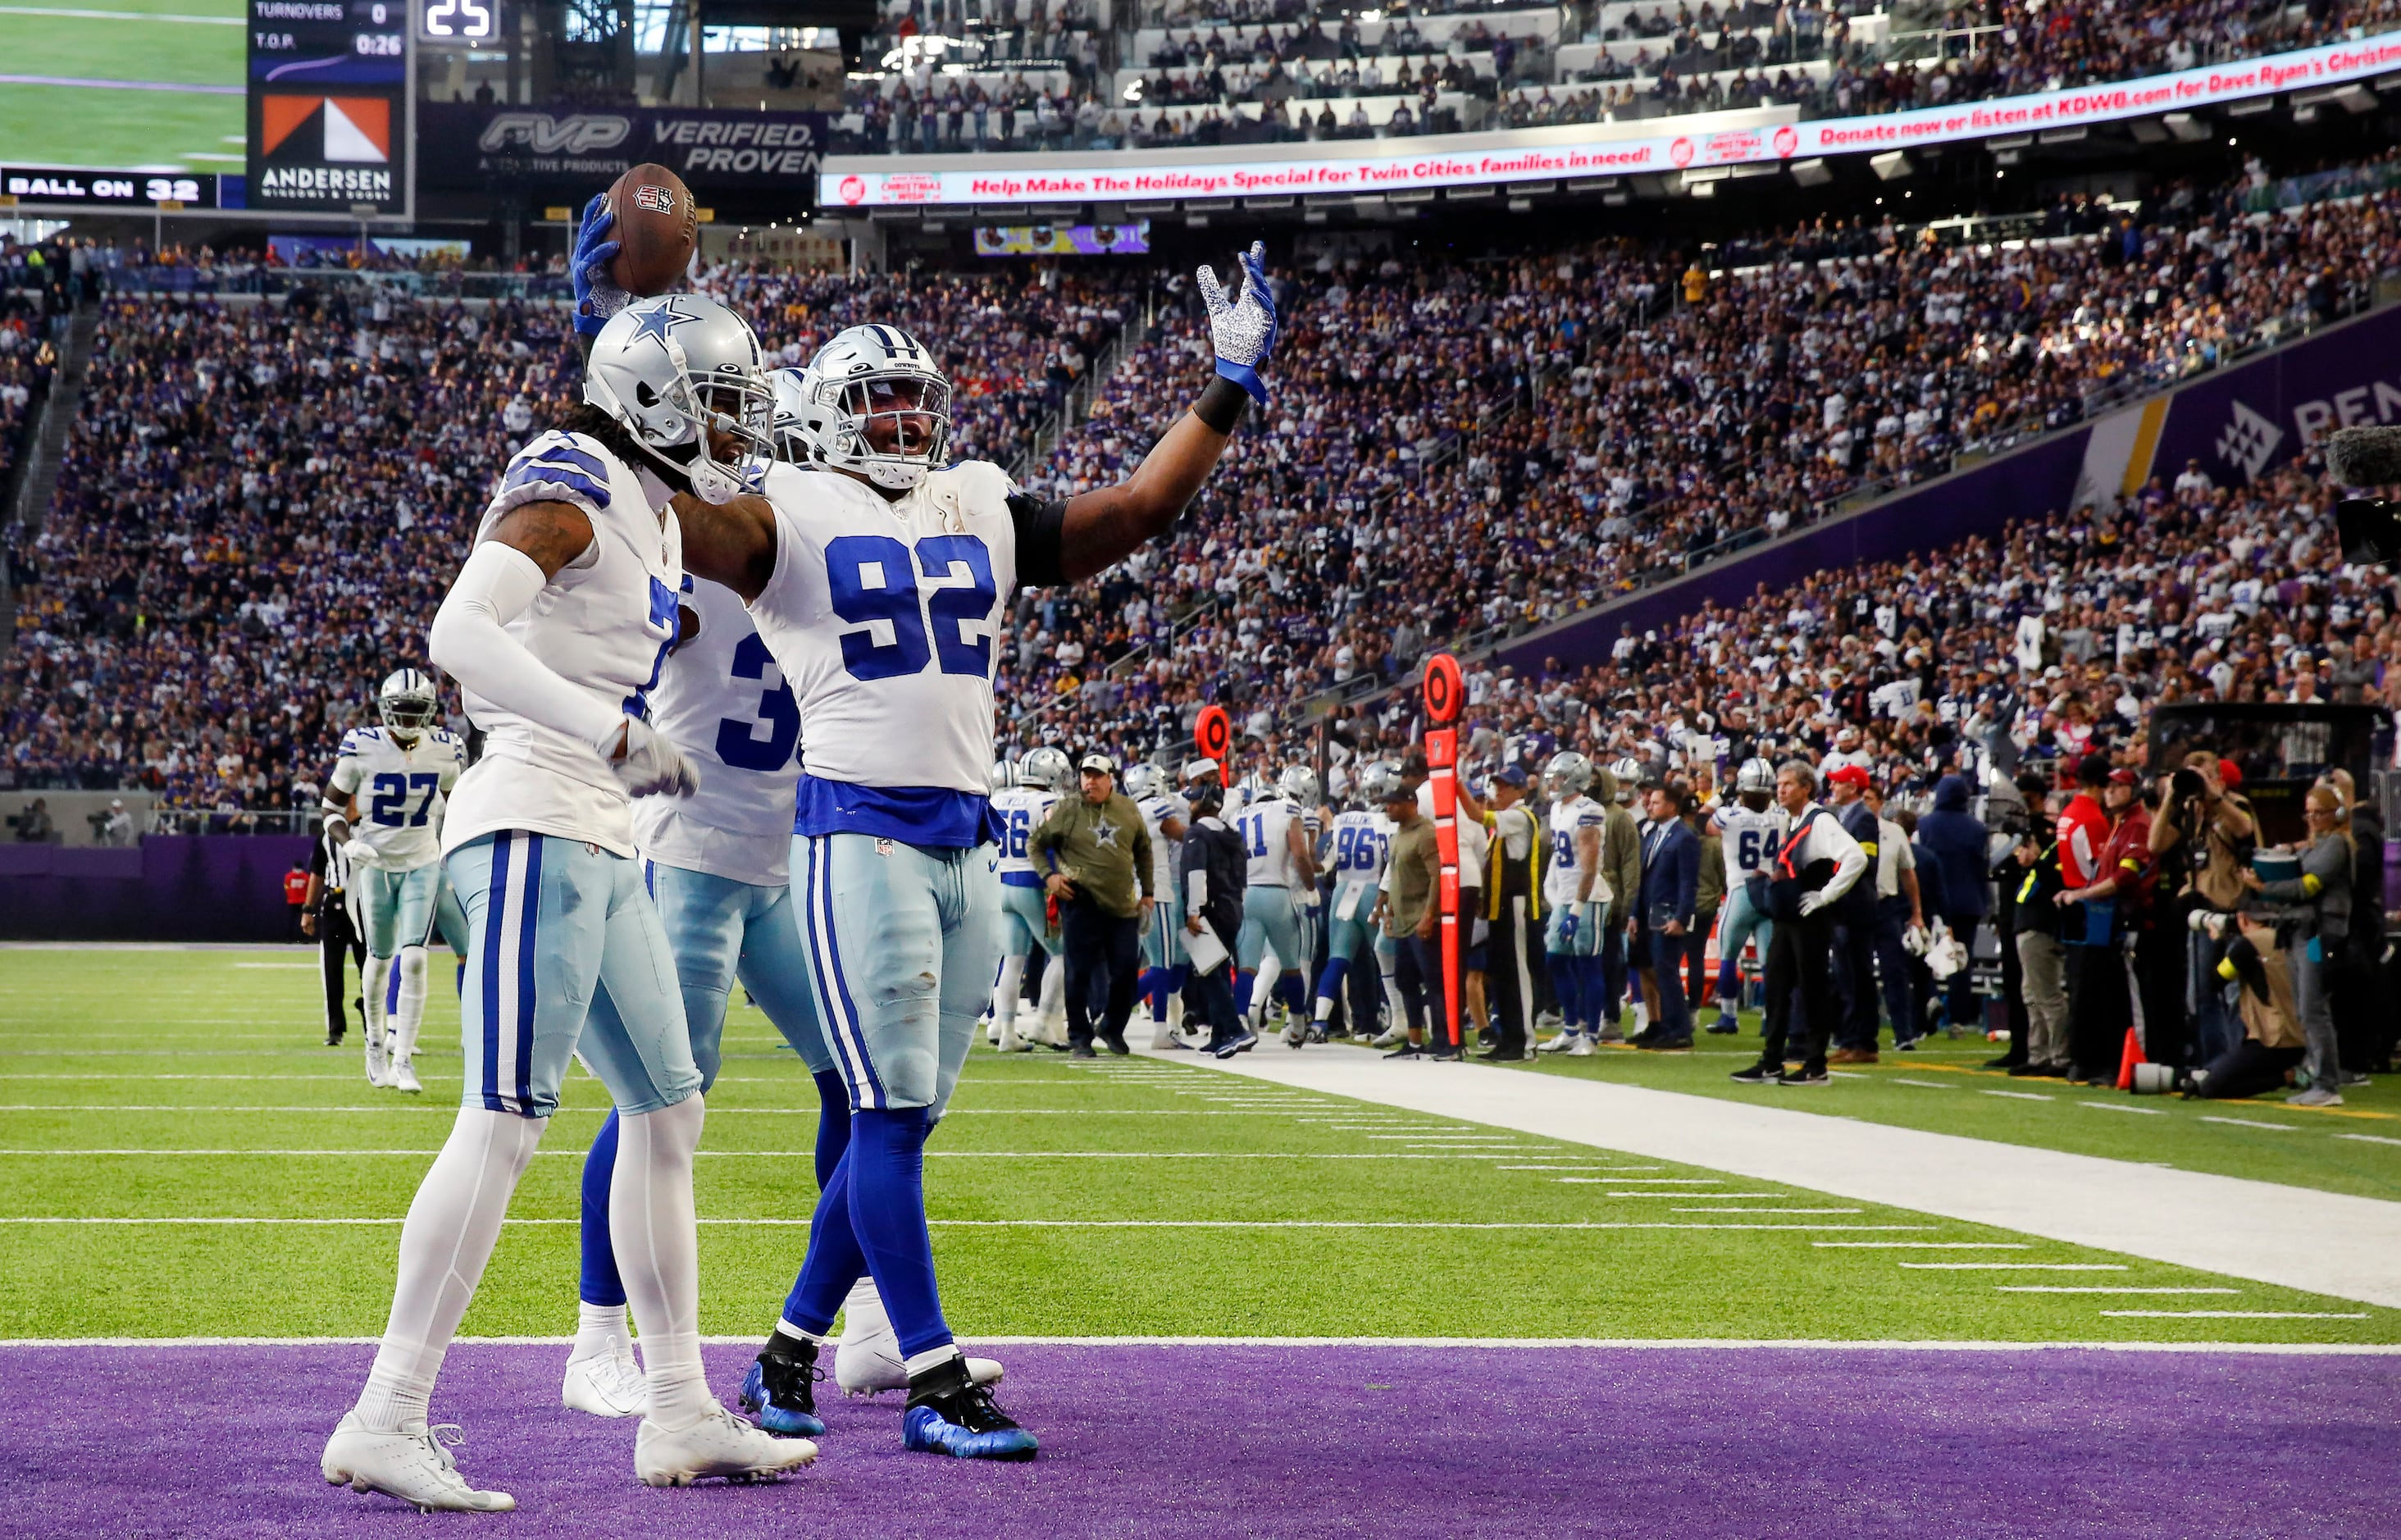 NFC East race: Cowboys make statement win, Giants lose to Lions